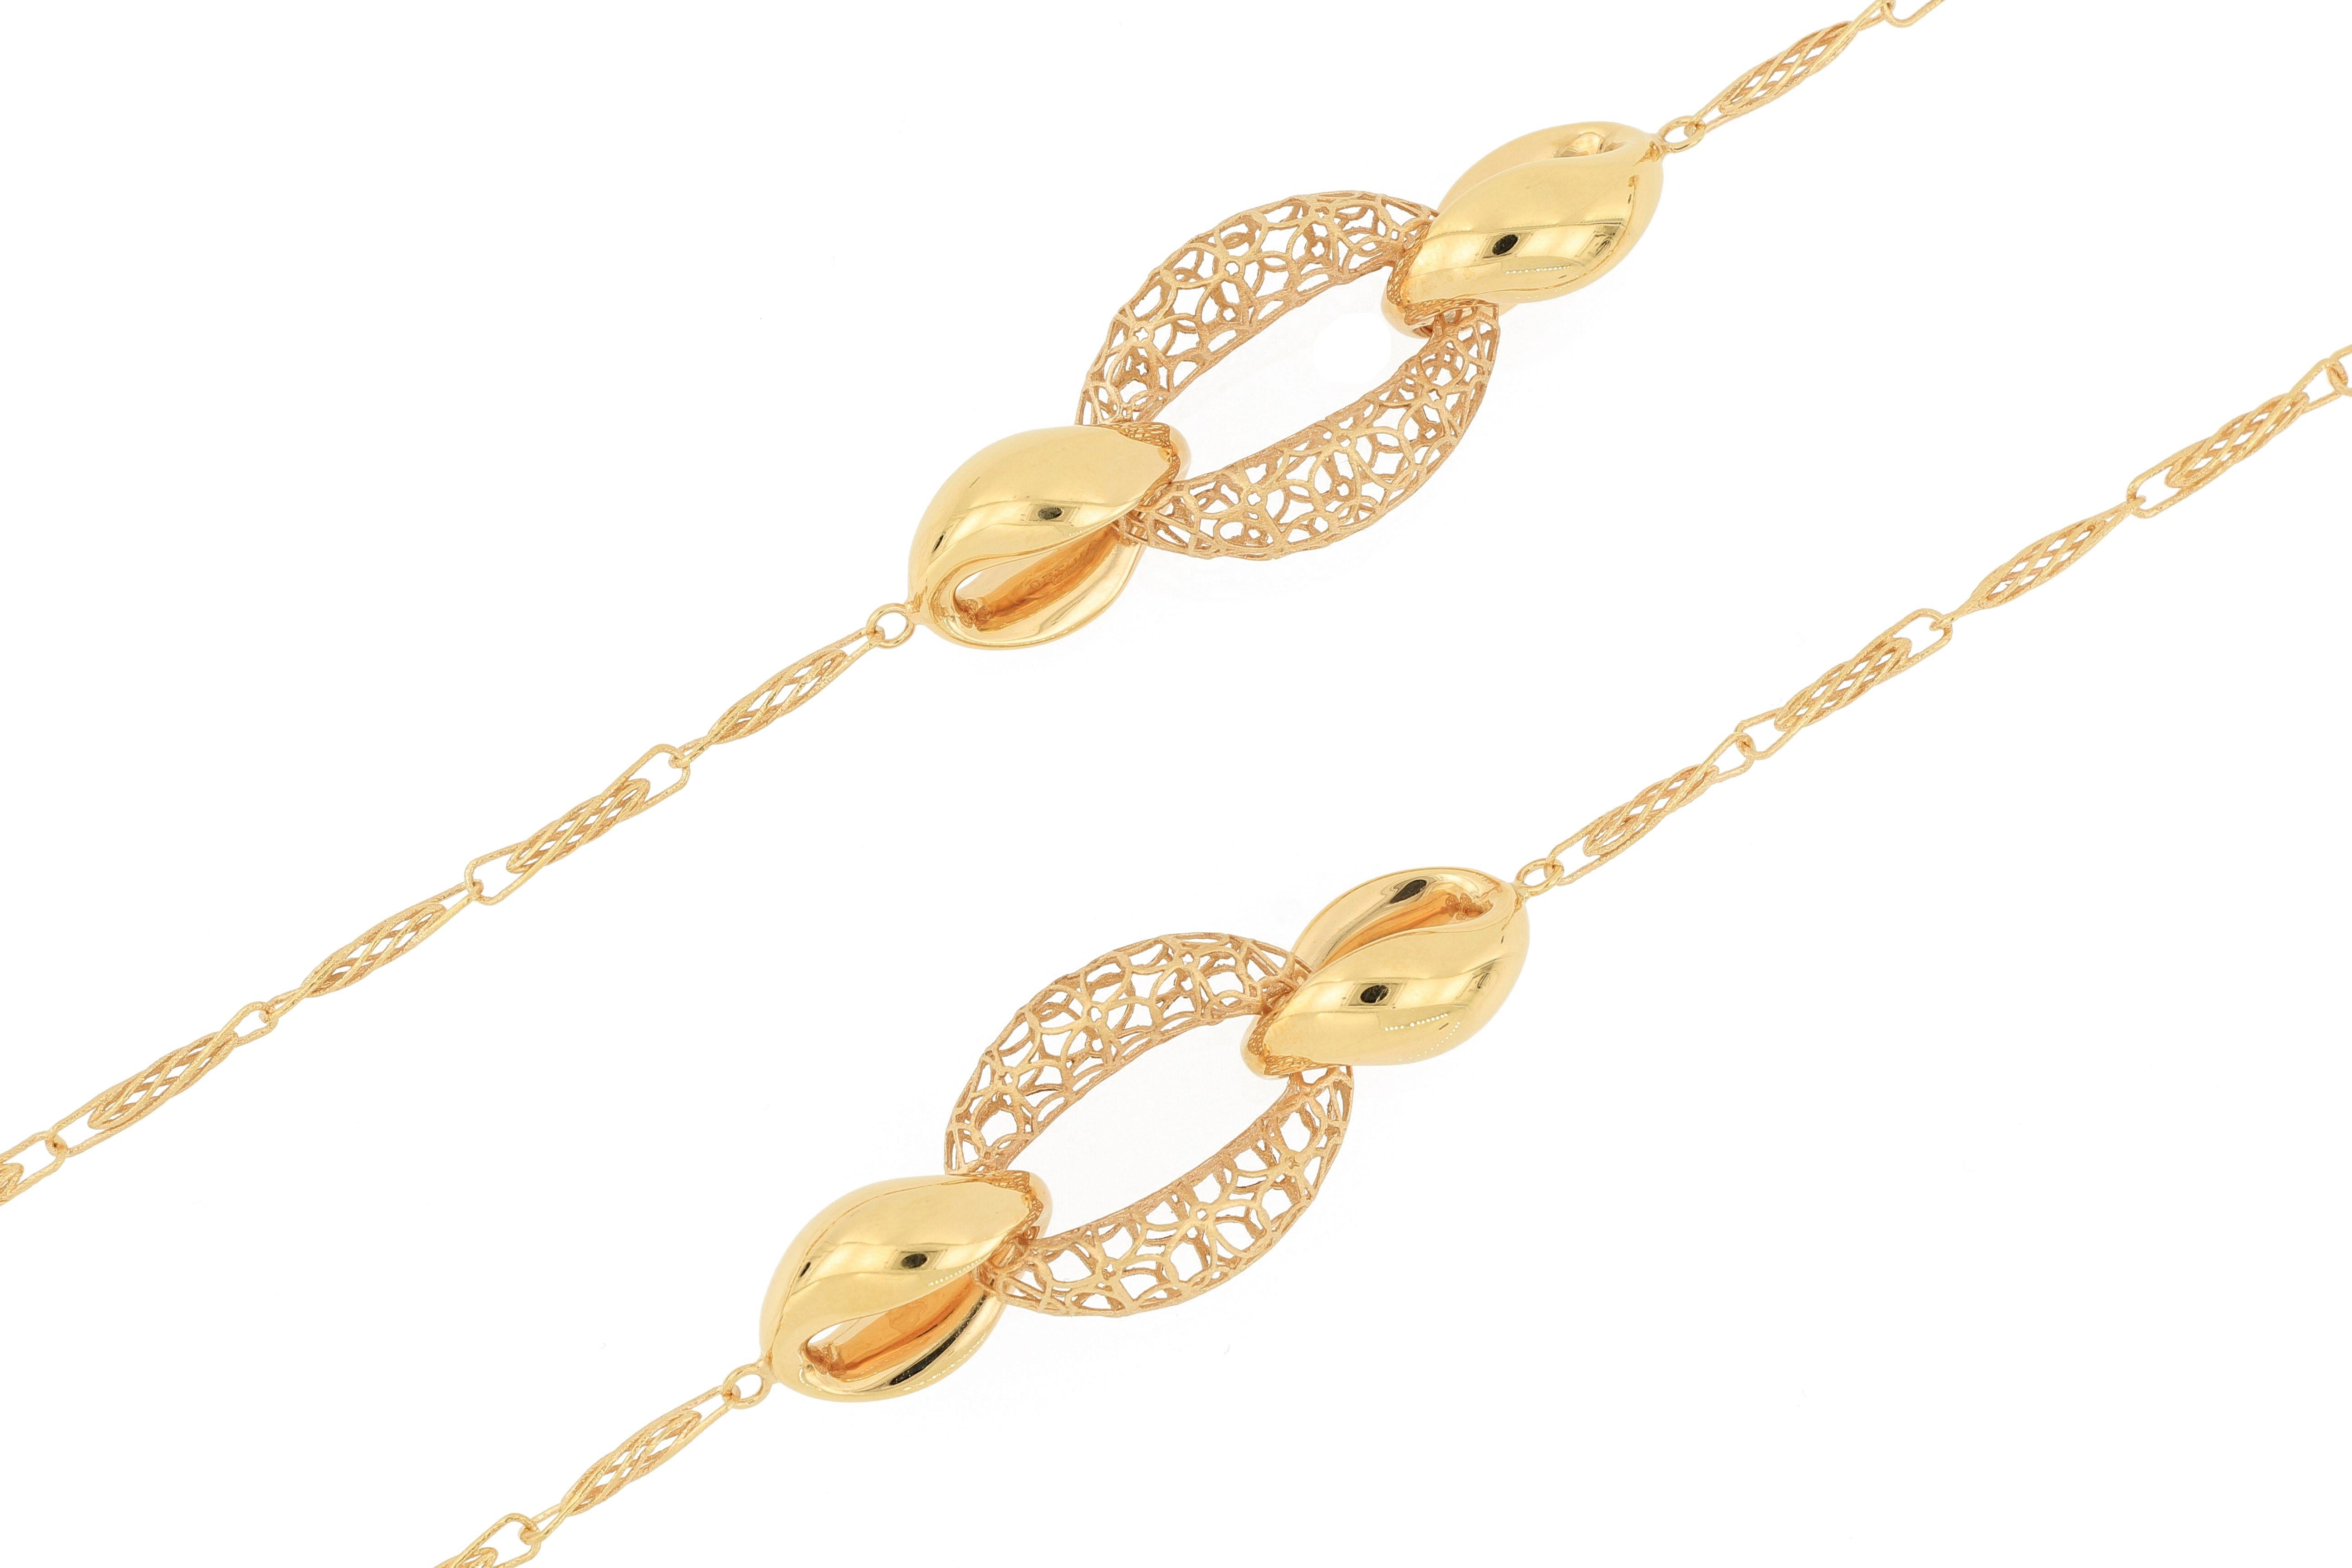 This 18 karat gold necklace is Italian made, with exquisite craftsmanship, hollowed out and beautifully designed. The entire chain body is interlocked with detailed structure.  This mix and match necklace is simply a piece of art, especially